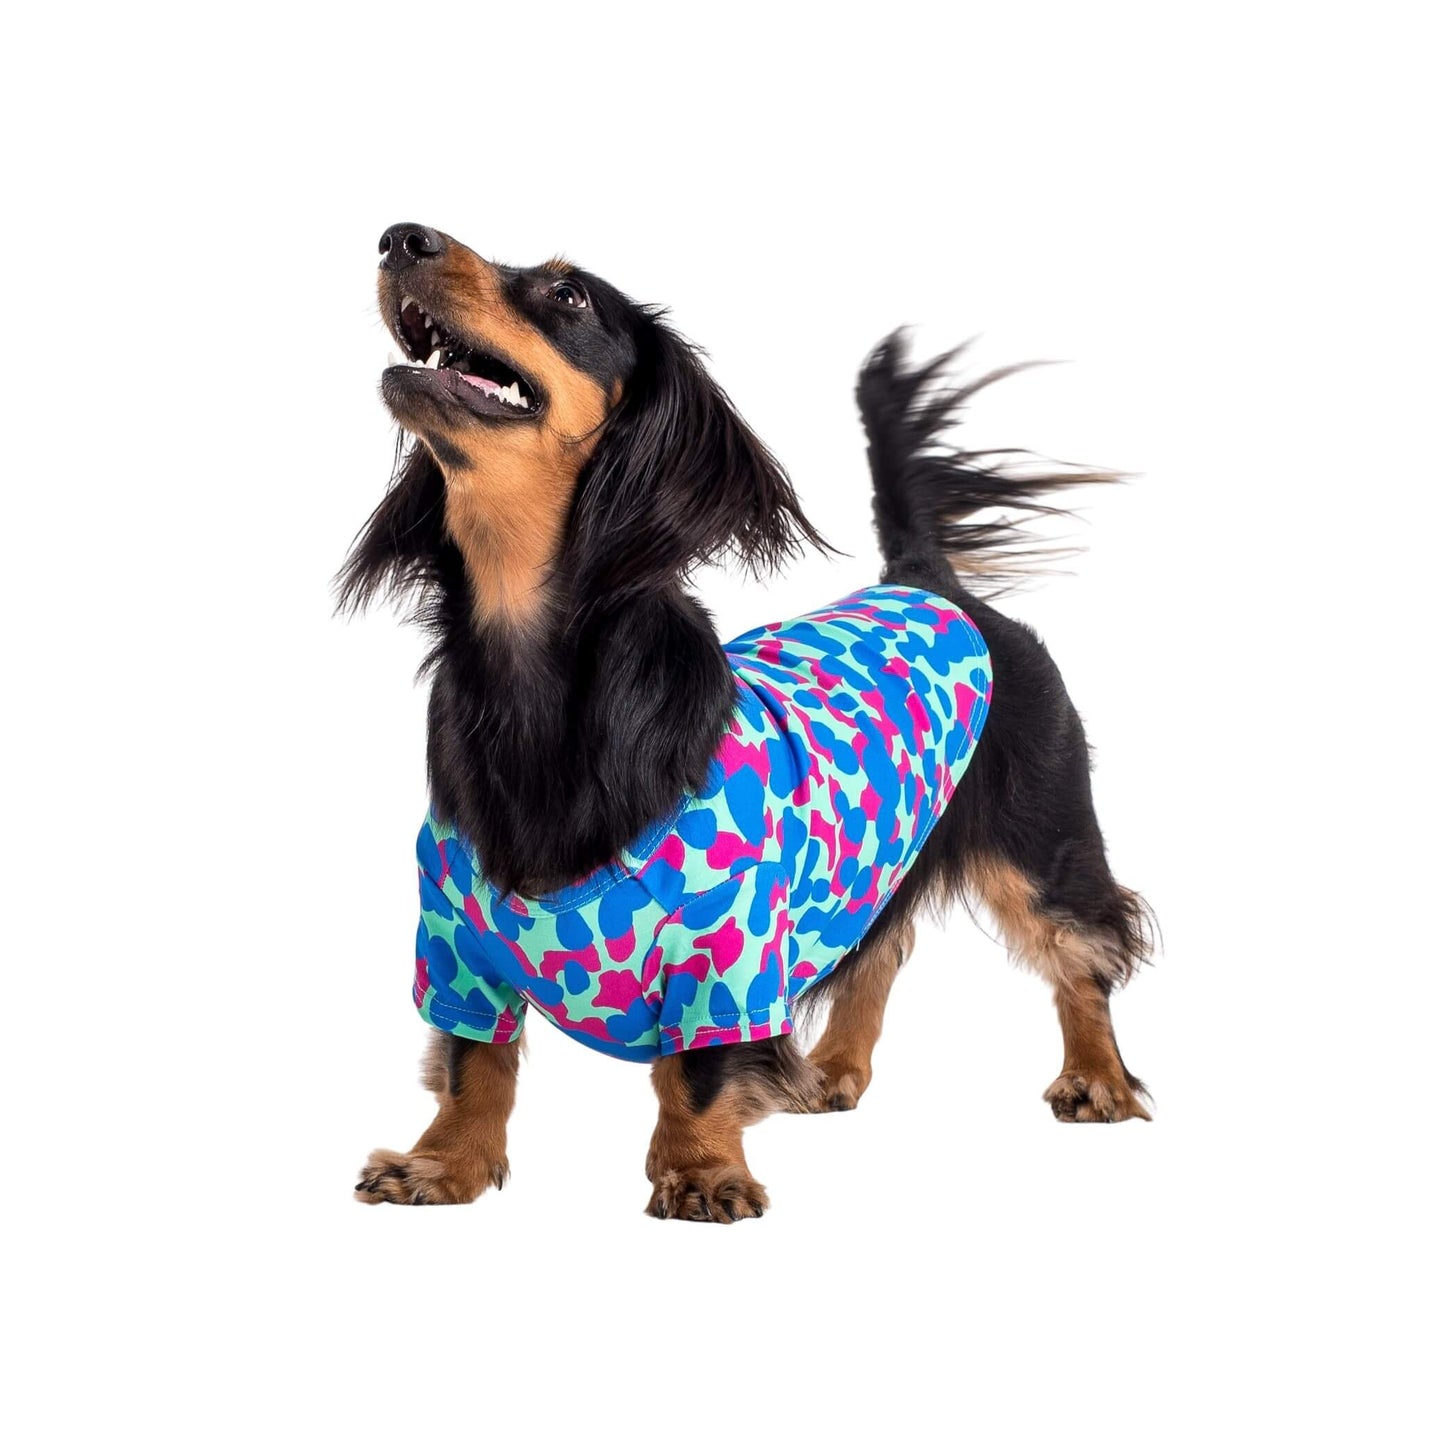 Ellie the Dachshund standing side on to the camera. It is wearing a Painted on dog shirt made by Vibrant Hound. The print is pink and blue blobs.